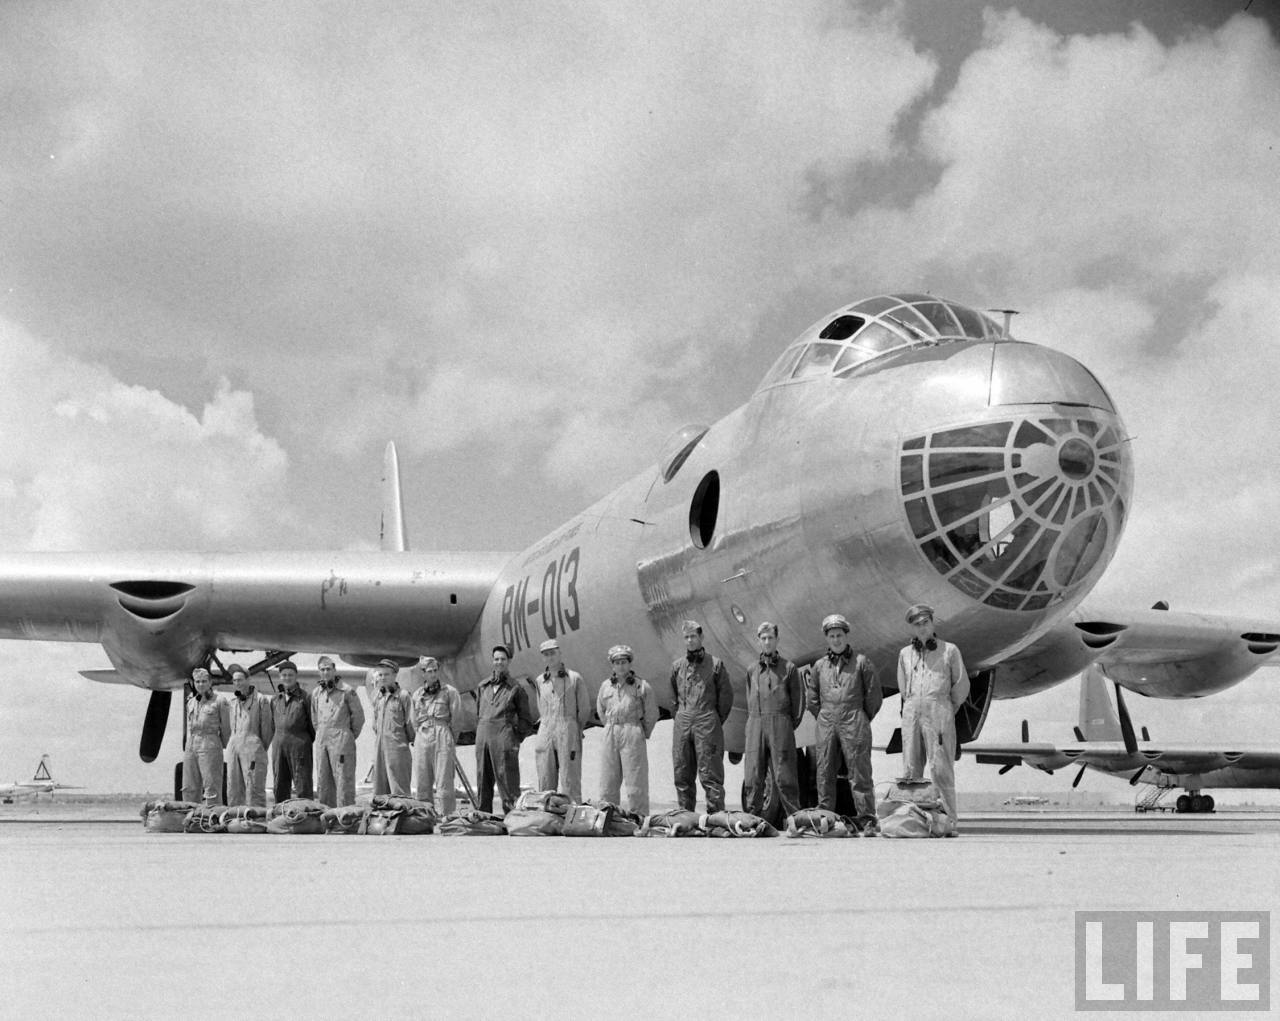 Aviation History | History of Flight | Aviation History Articles, Warbirds, Bombers, Trainers, Pilots | The Peacemaker! Convair B-36A Strategic Bomber